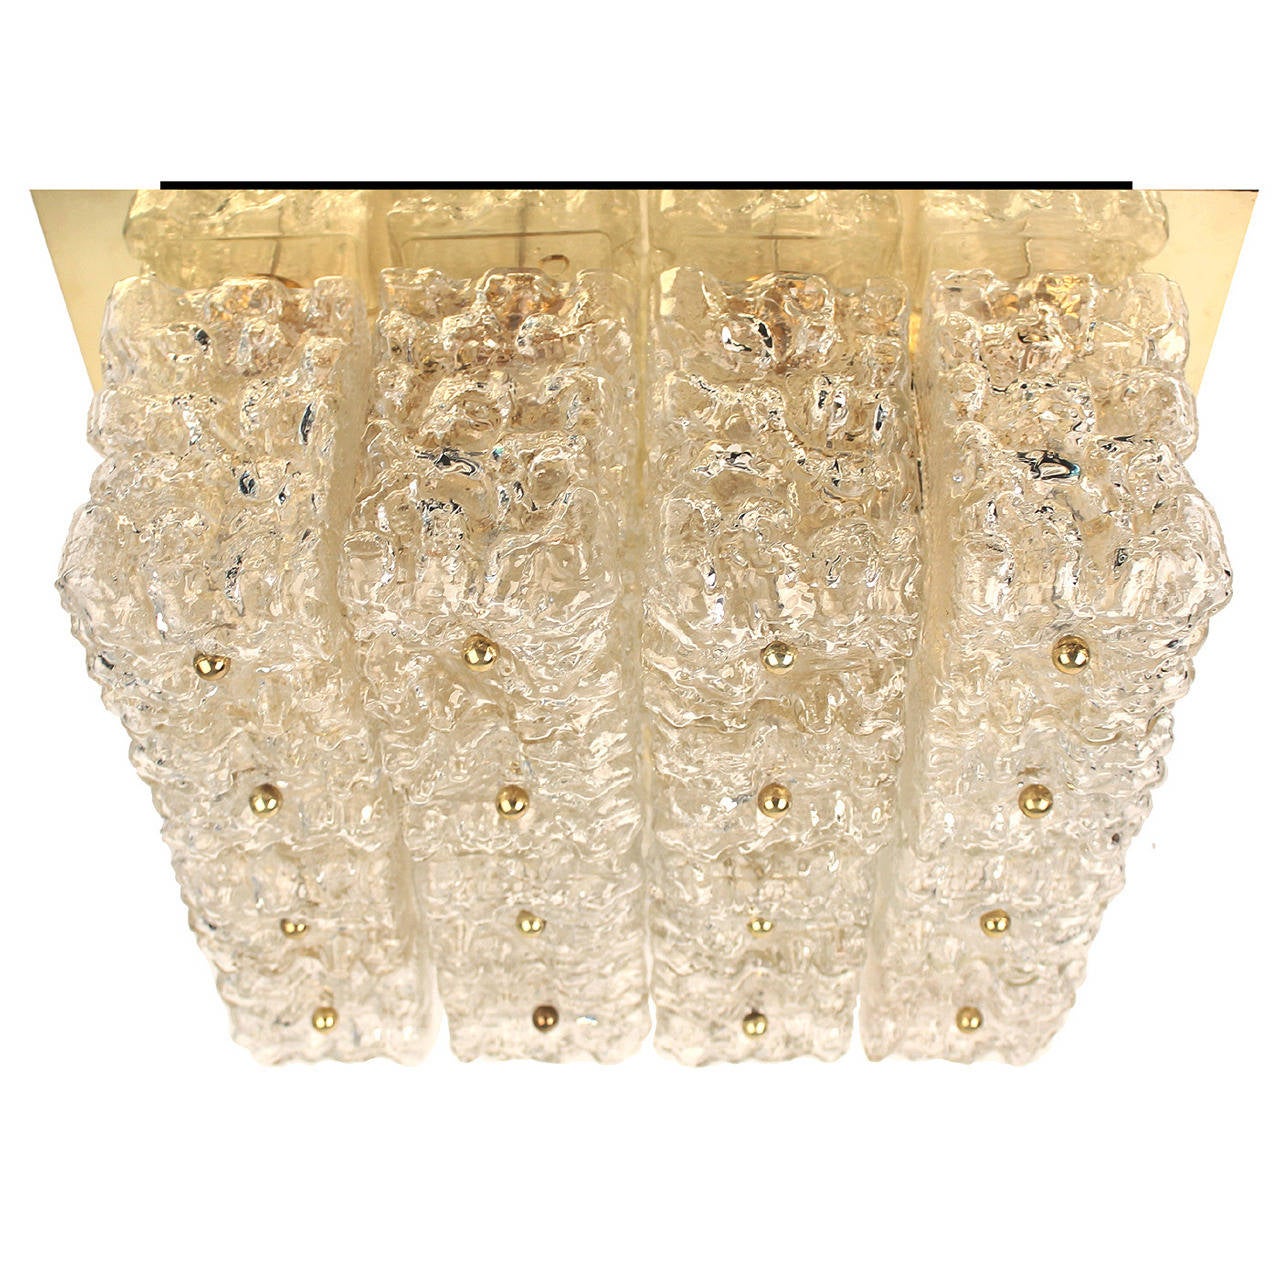 Large  Limburg Flush Mount Light with 16 structured glass towers
mounted on a   brass and metal base, design by 
Helene Tynell, very heavy high end light

2 available

4 standard bulbs  up to 100 watts each